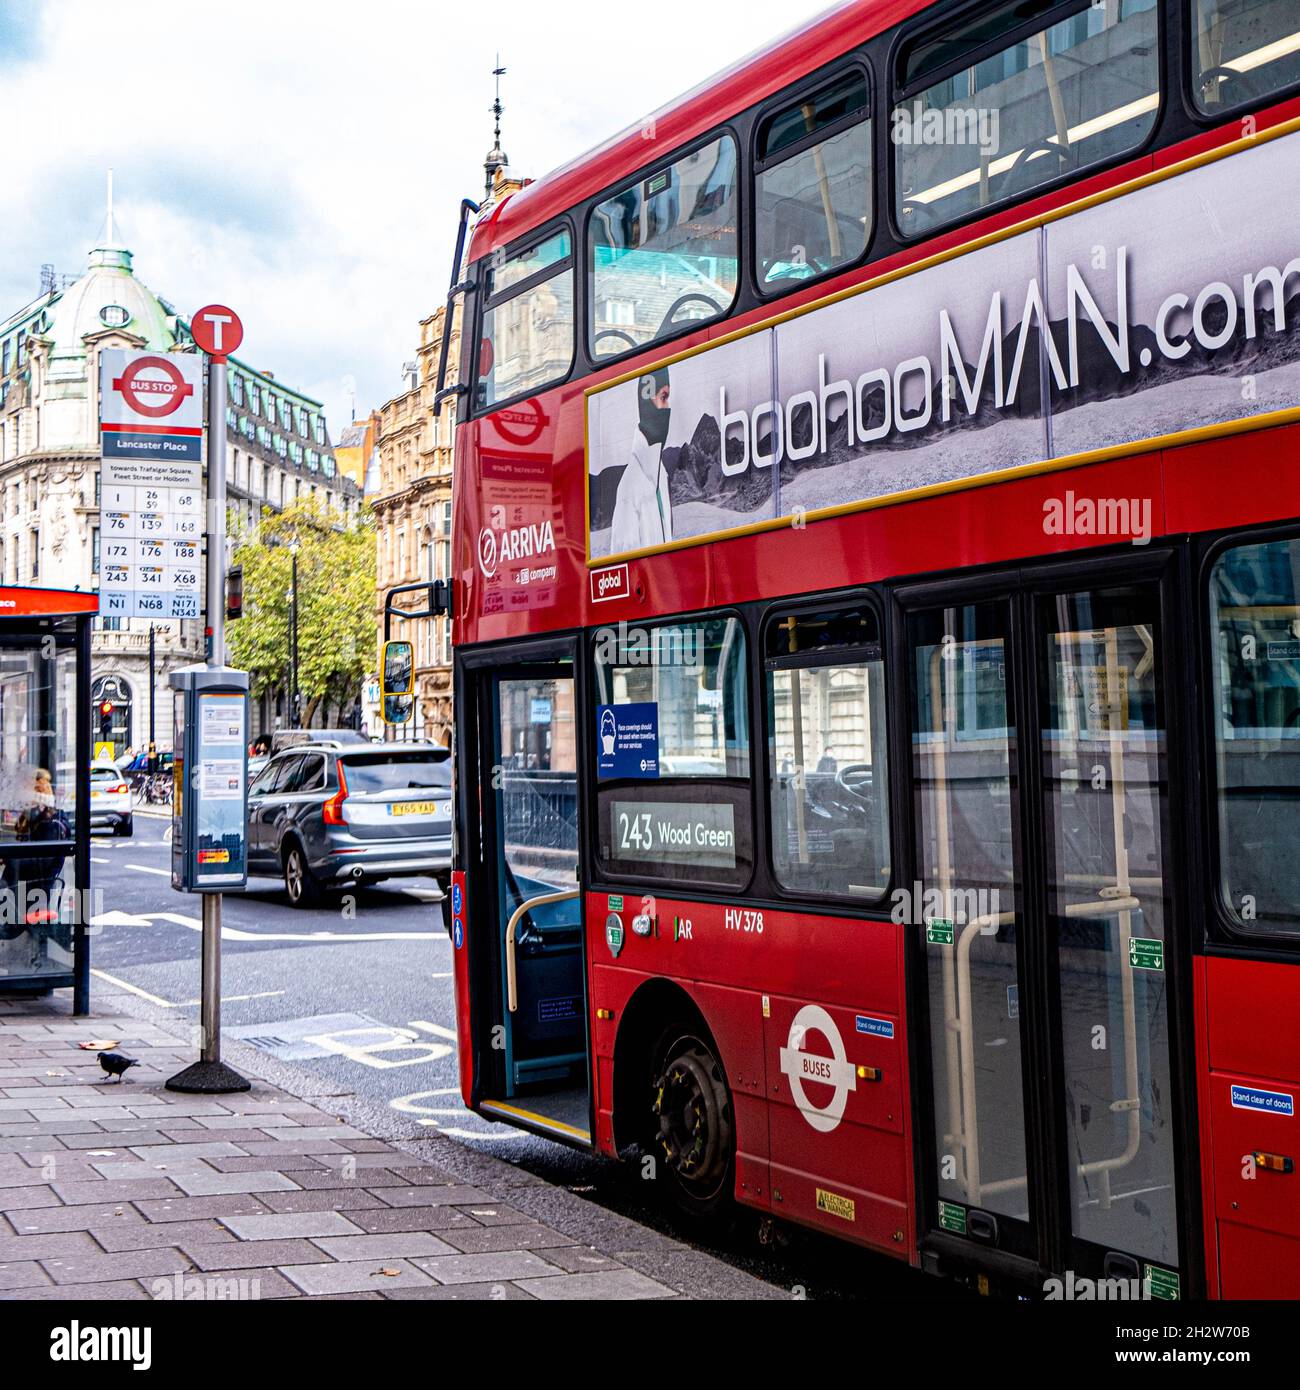 A Red Transport For London double Decker Bus Parked At A Bus Stop In Central London With No People Stock Photo